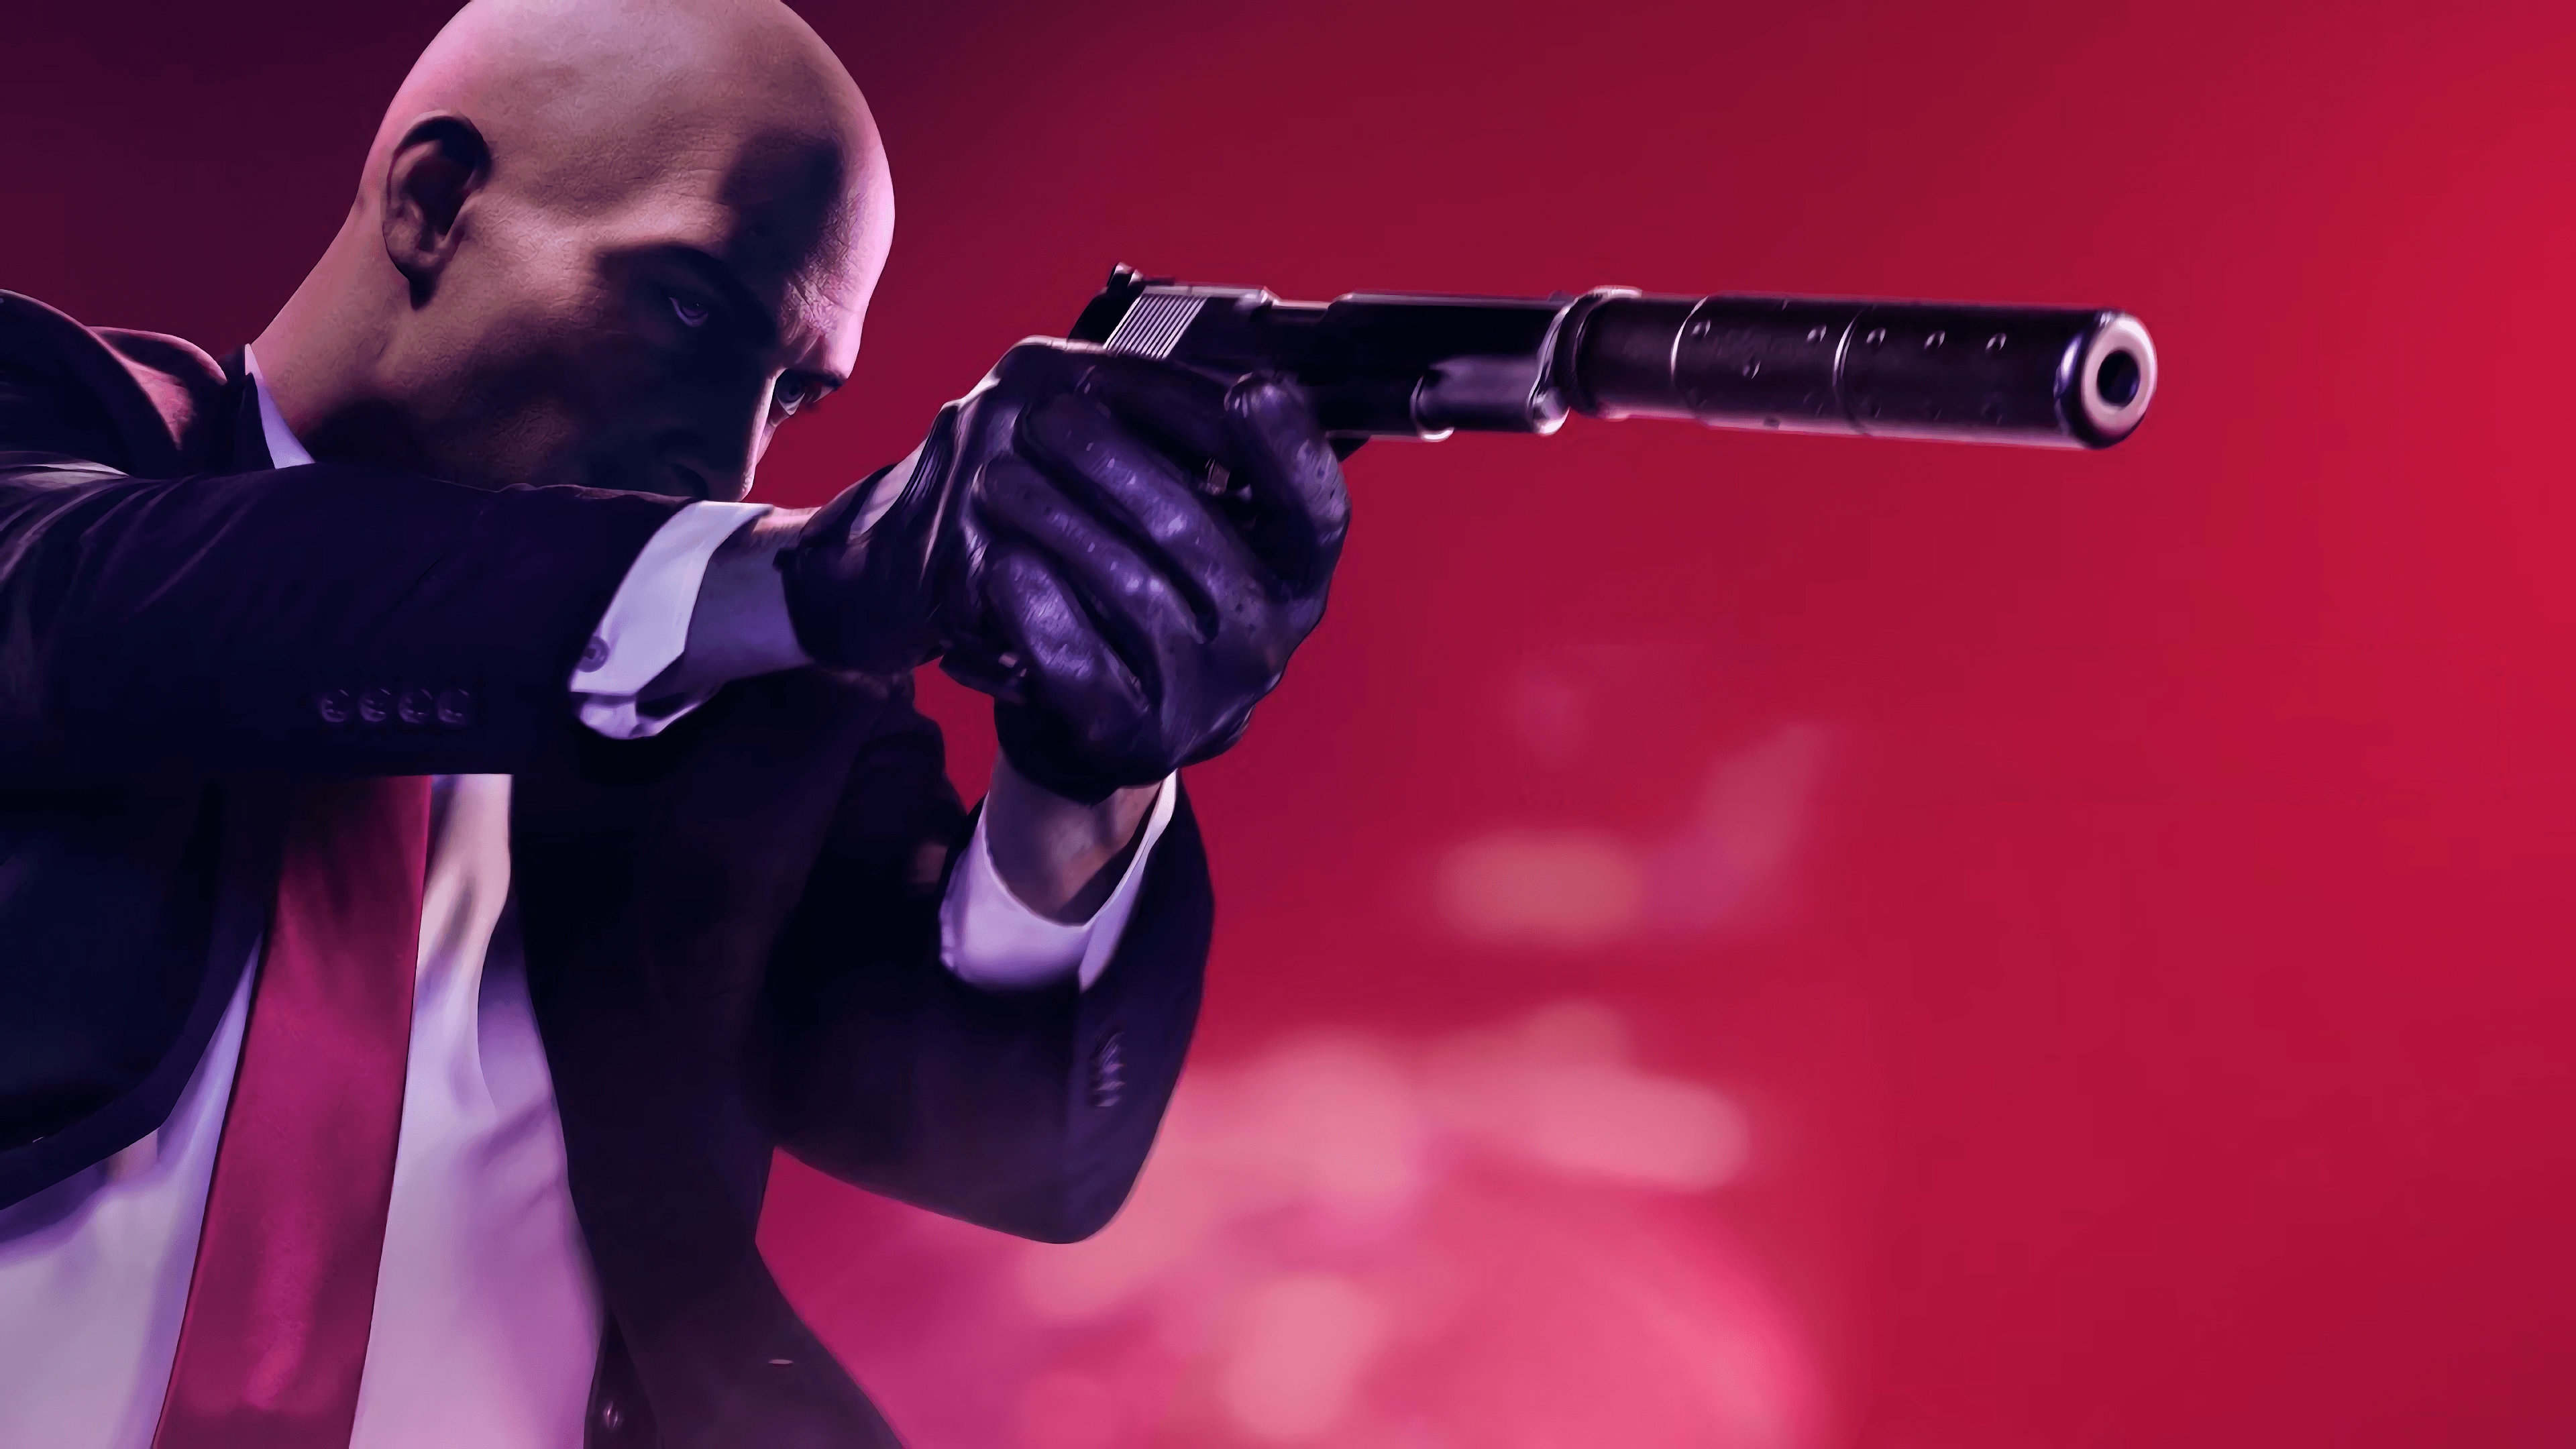 4k HITMAN 2 Wallpaper with titles removed